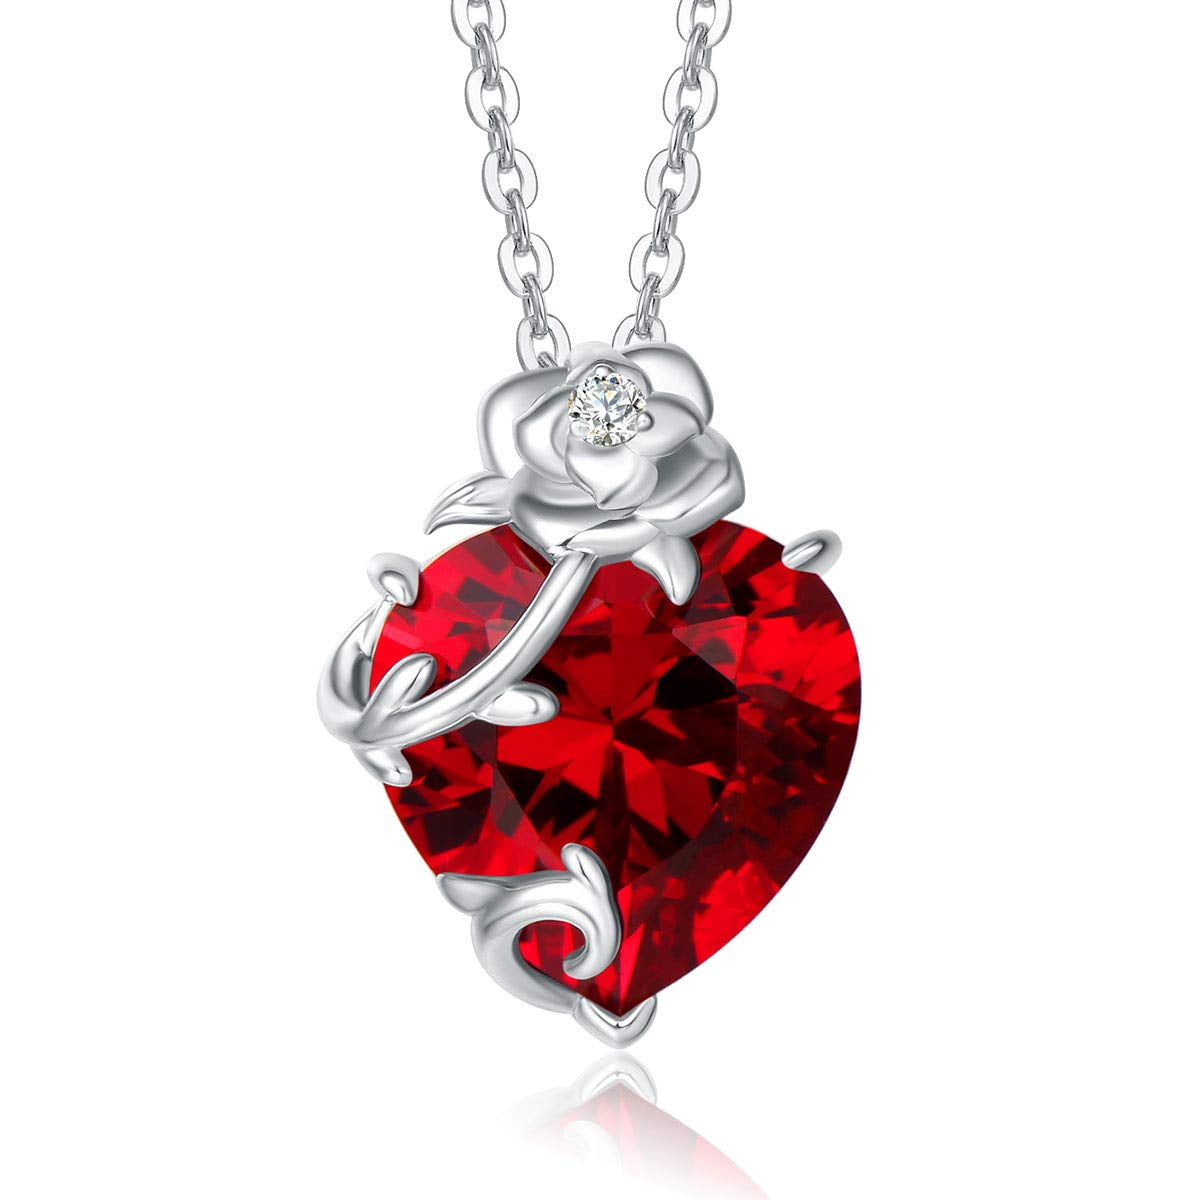 Nanny Grandmother Silver Heart Necklace with Birthstone 925 Sterling Silver  Jewellery Gift